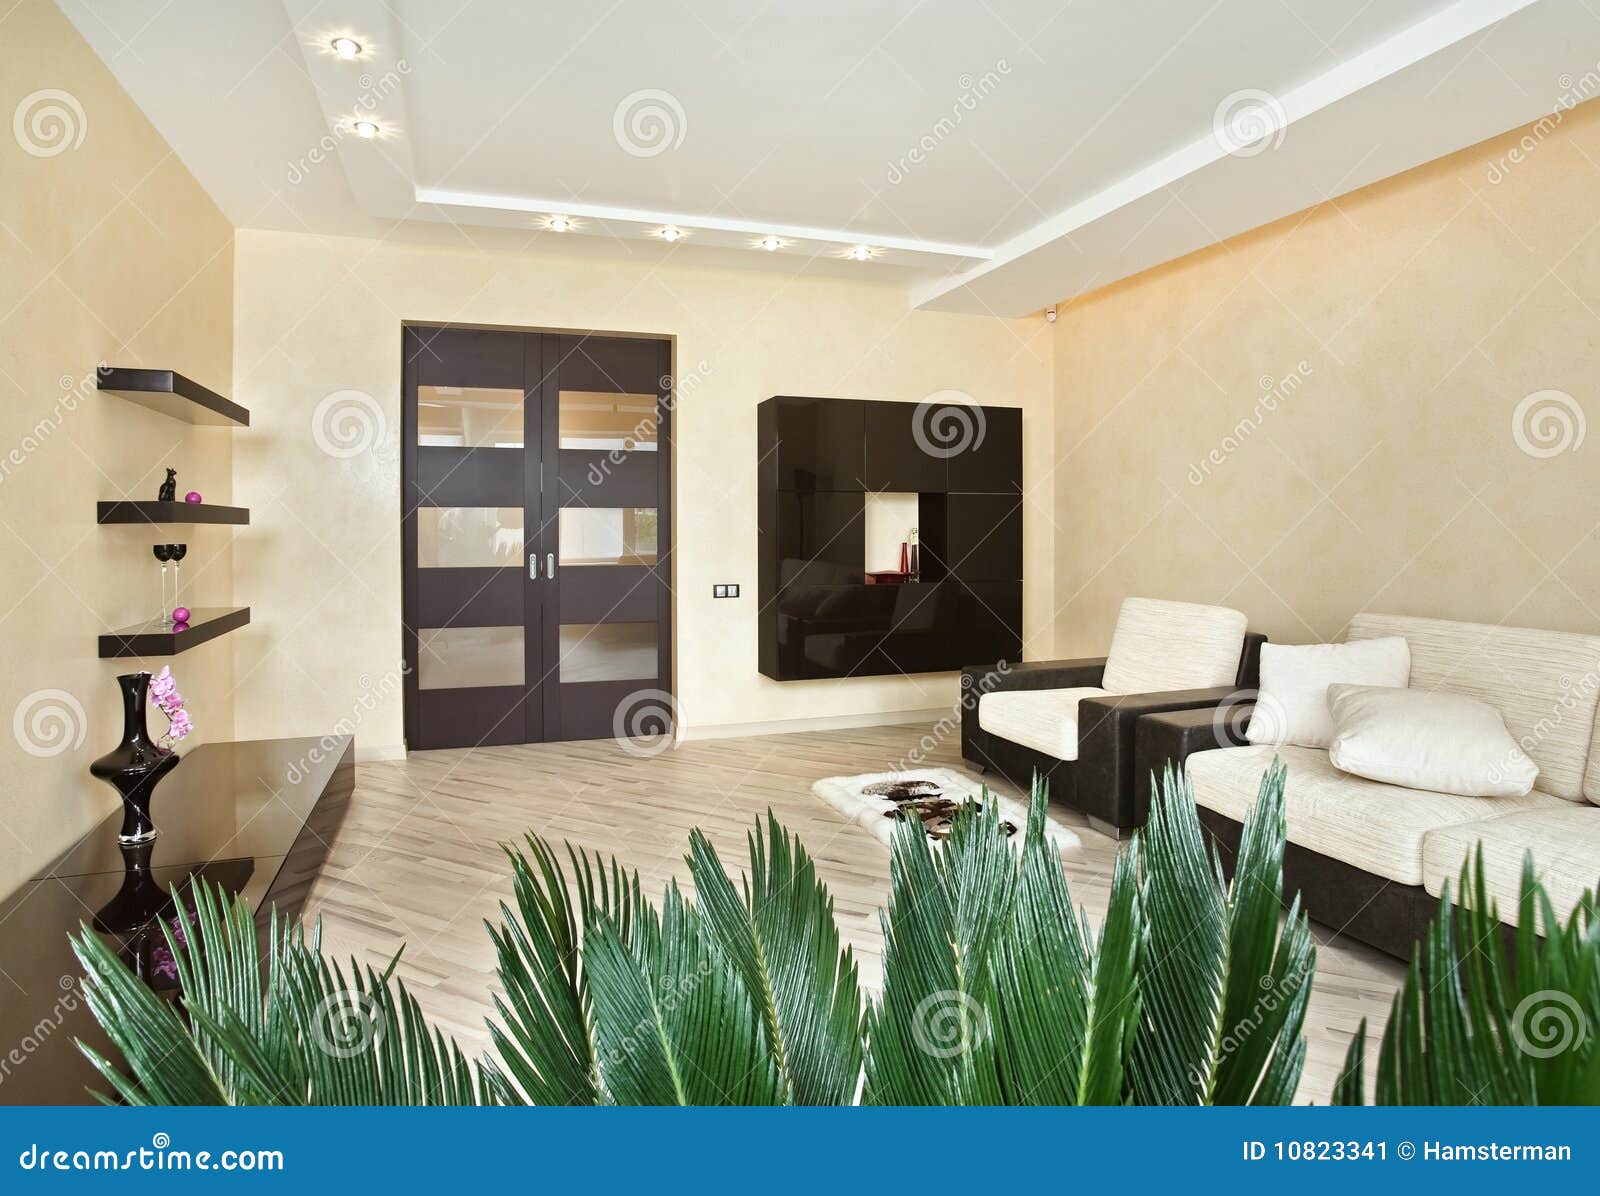  Modern  Drawing room  Interior  In Warm Tones Stock Image 